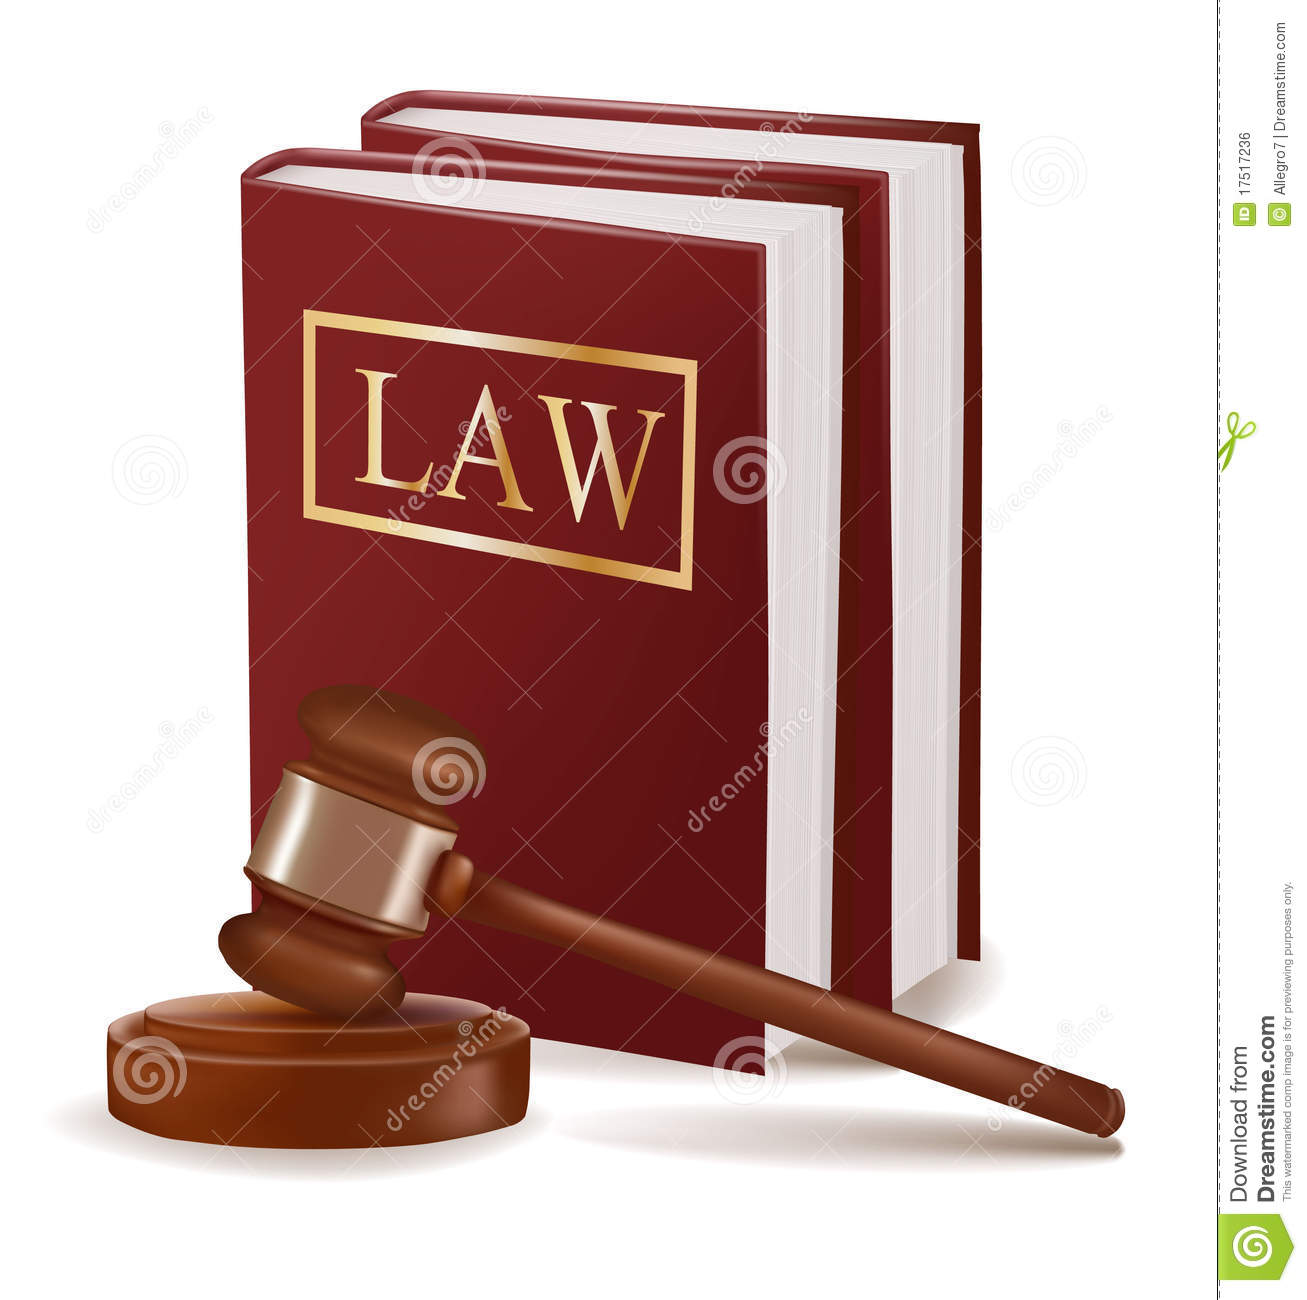 Judge Gavel And Law Books  Royalty Free Stock Image   Image  17517236